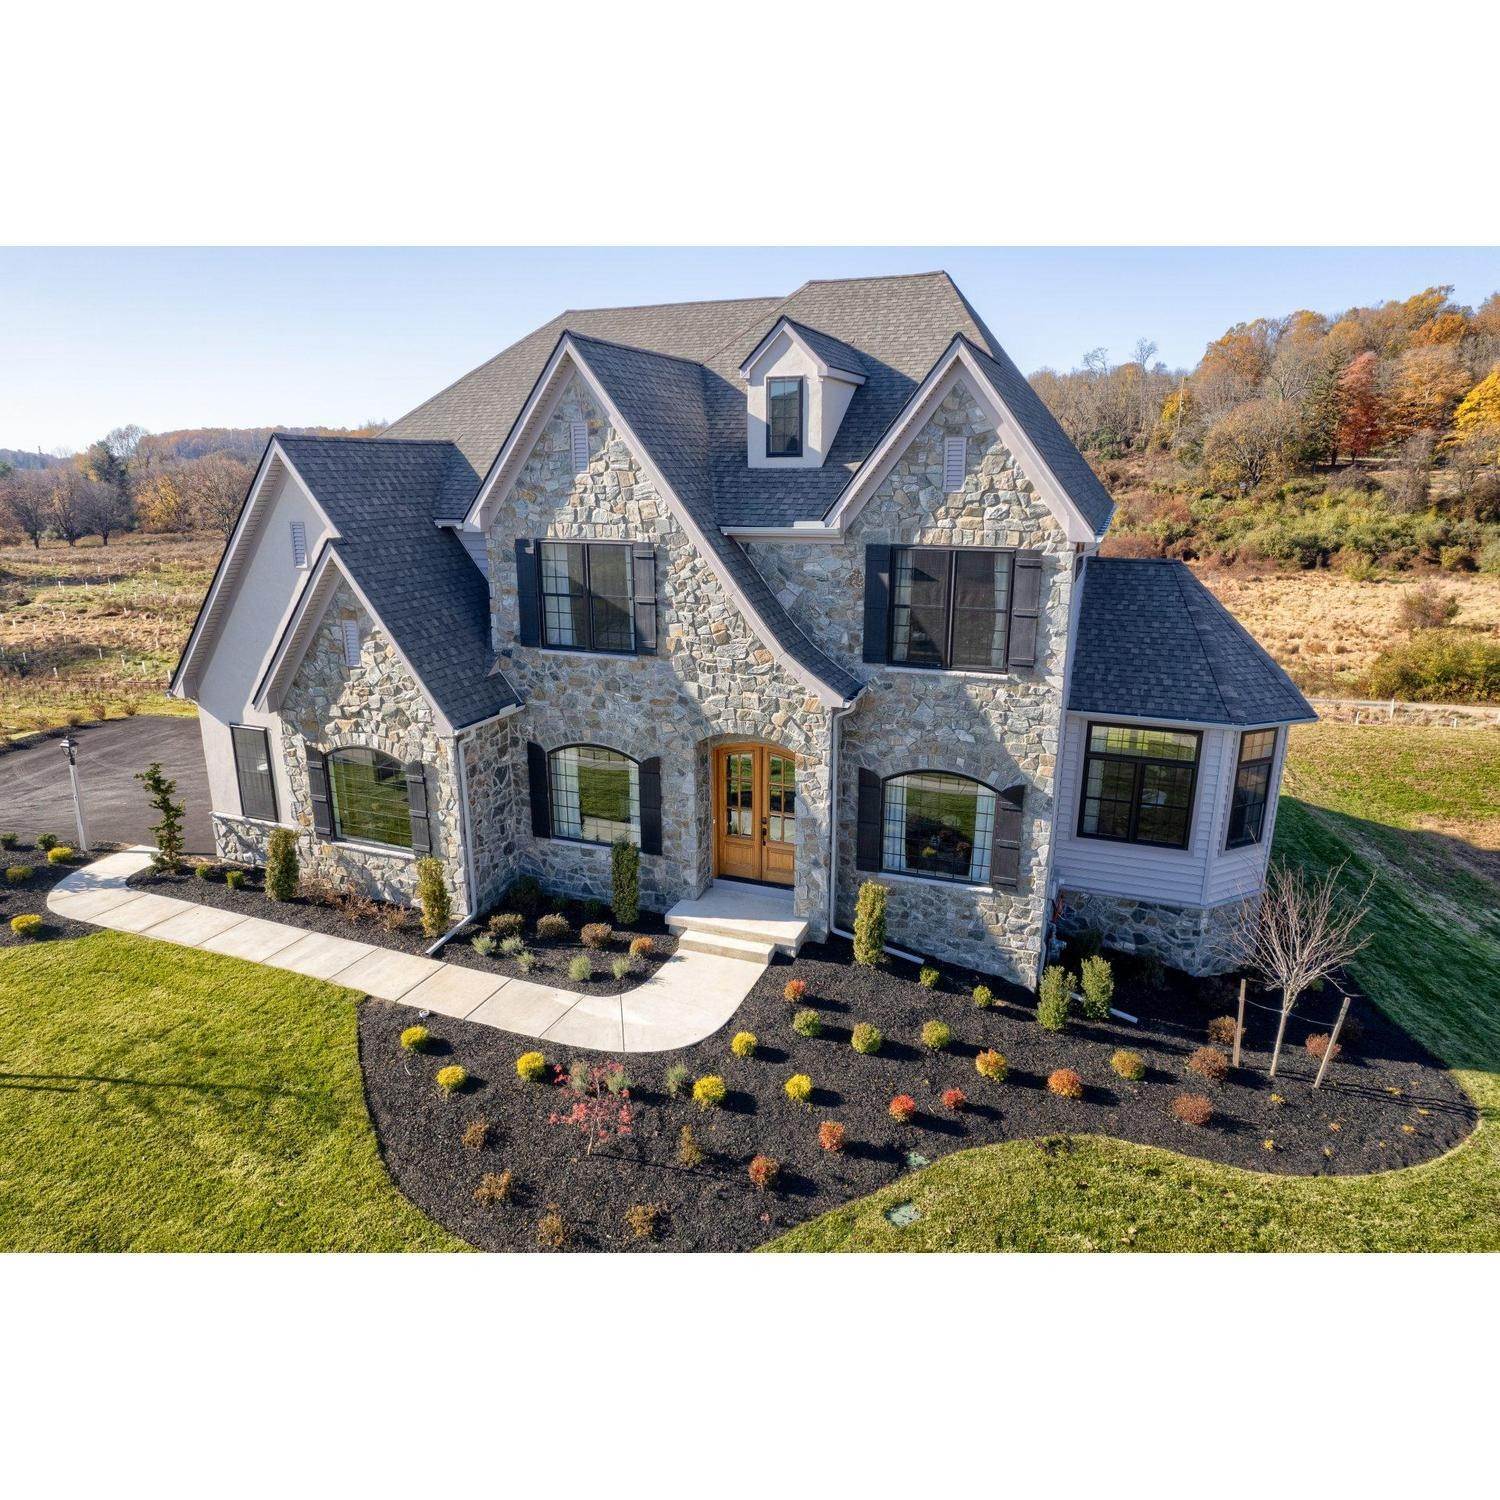 43. 101 Parkview Way, Newtown Square, PA 19073에 Ventry at Edgmont Preserve 건물